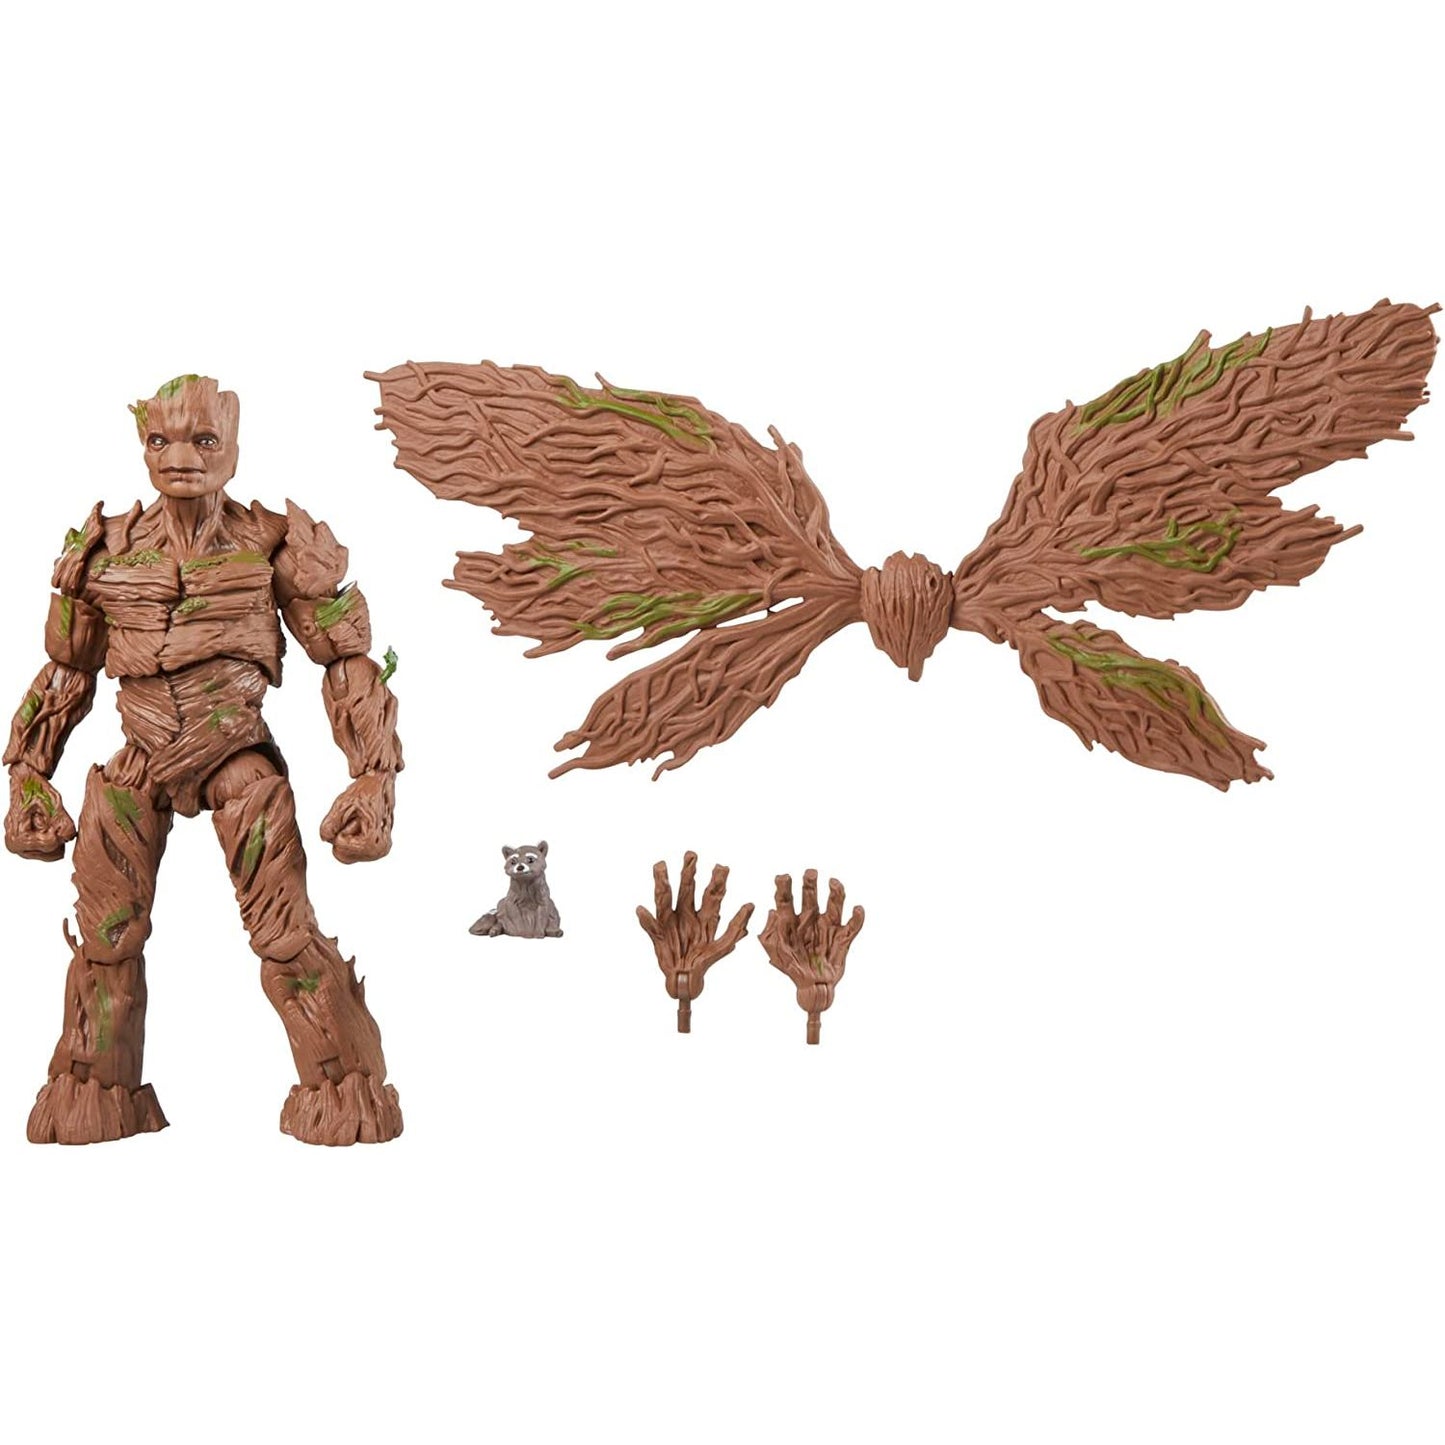 Guardians of the Galaxy Vol. 3 Marvel Legends Groot 6-Inch Action Figure - Heretoserveyou